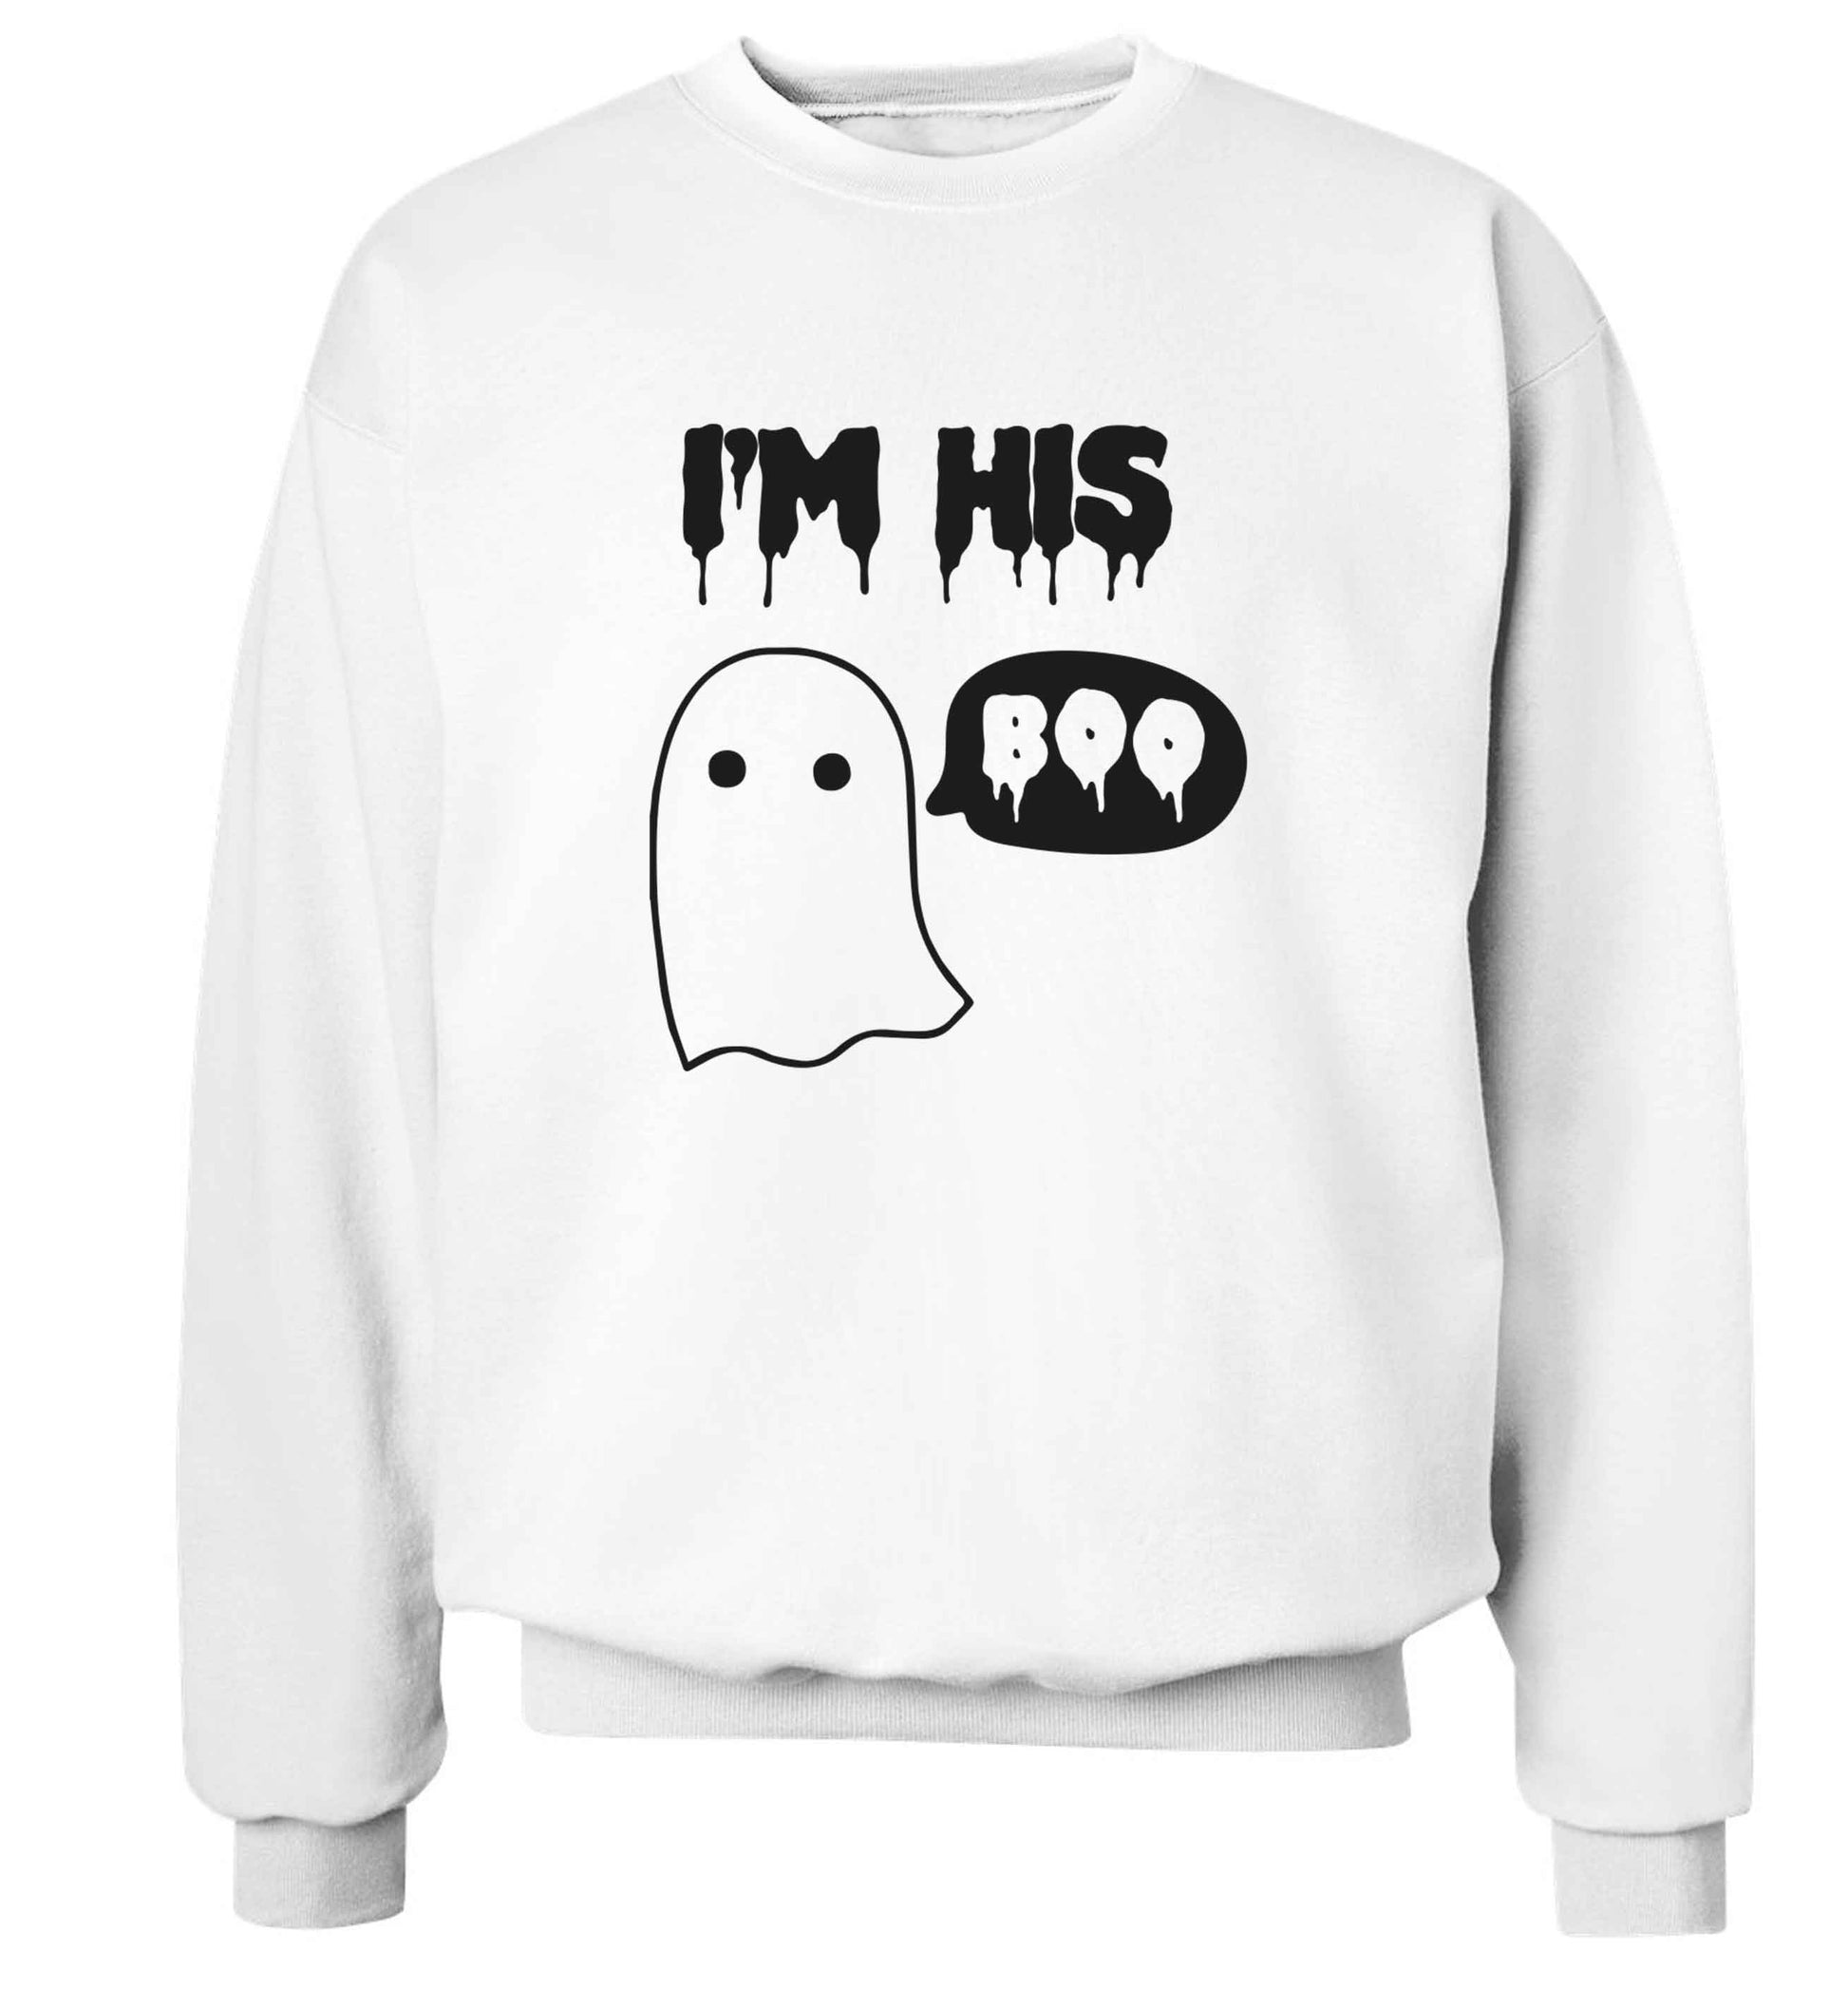 I'm his boo adult's unisex white sweater 2XL